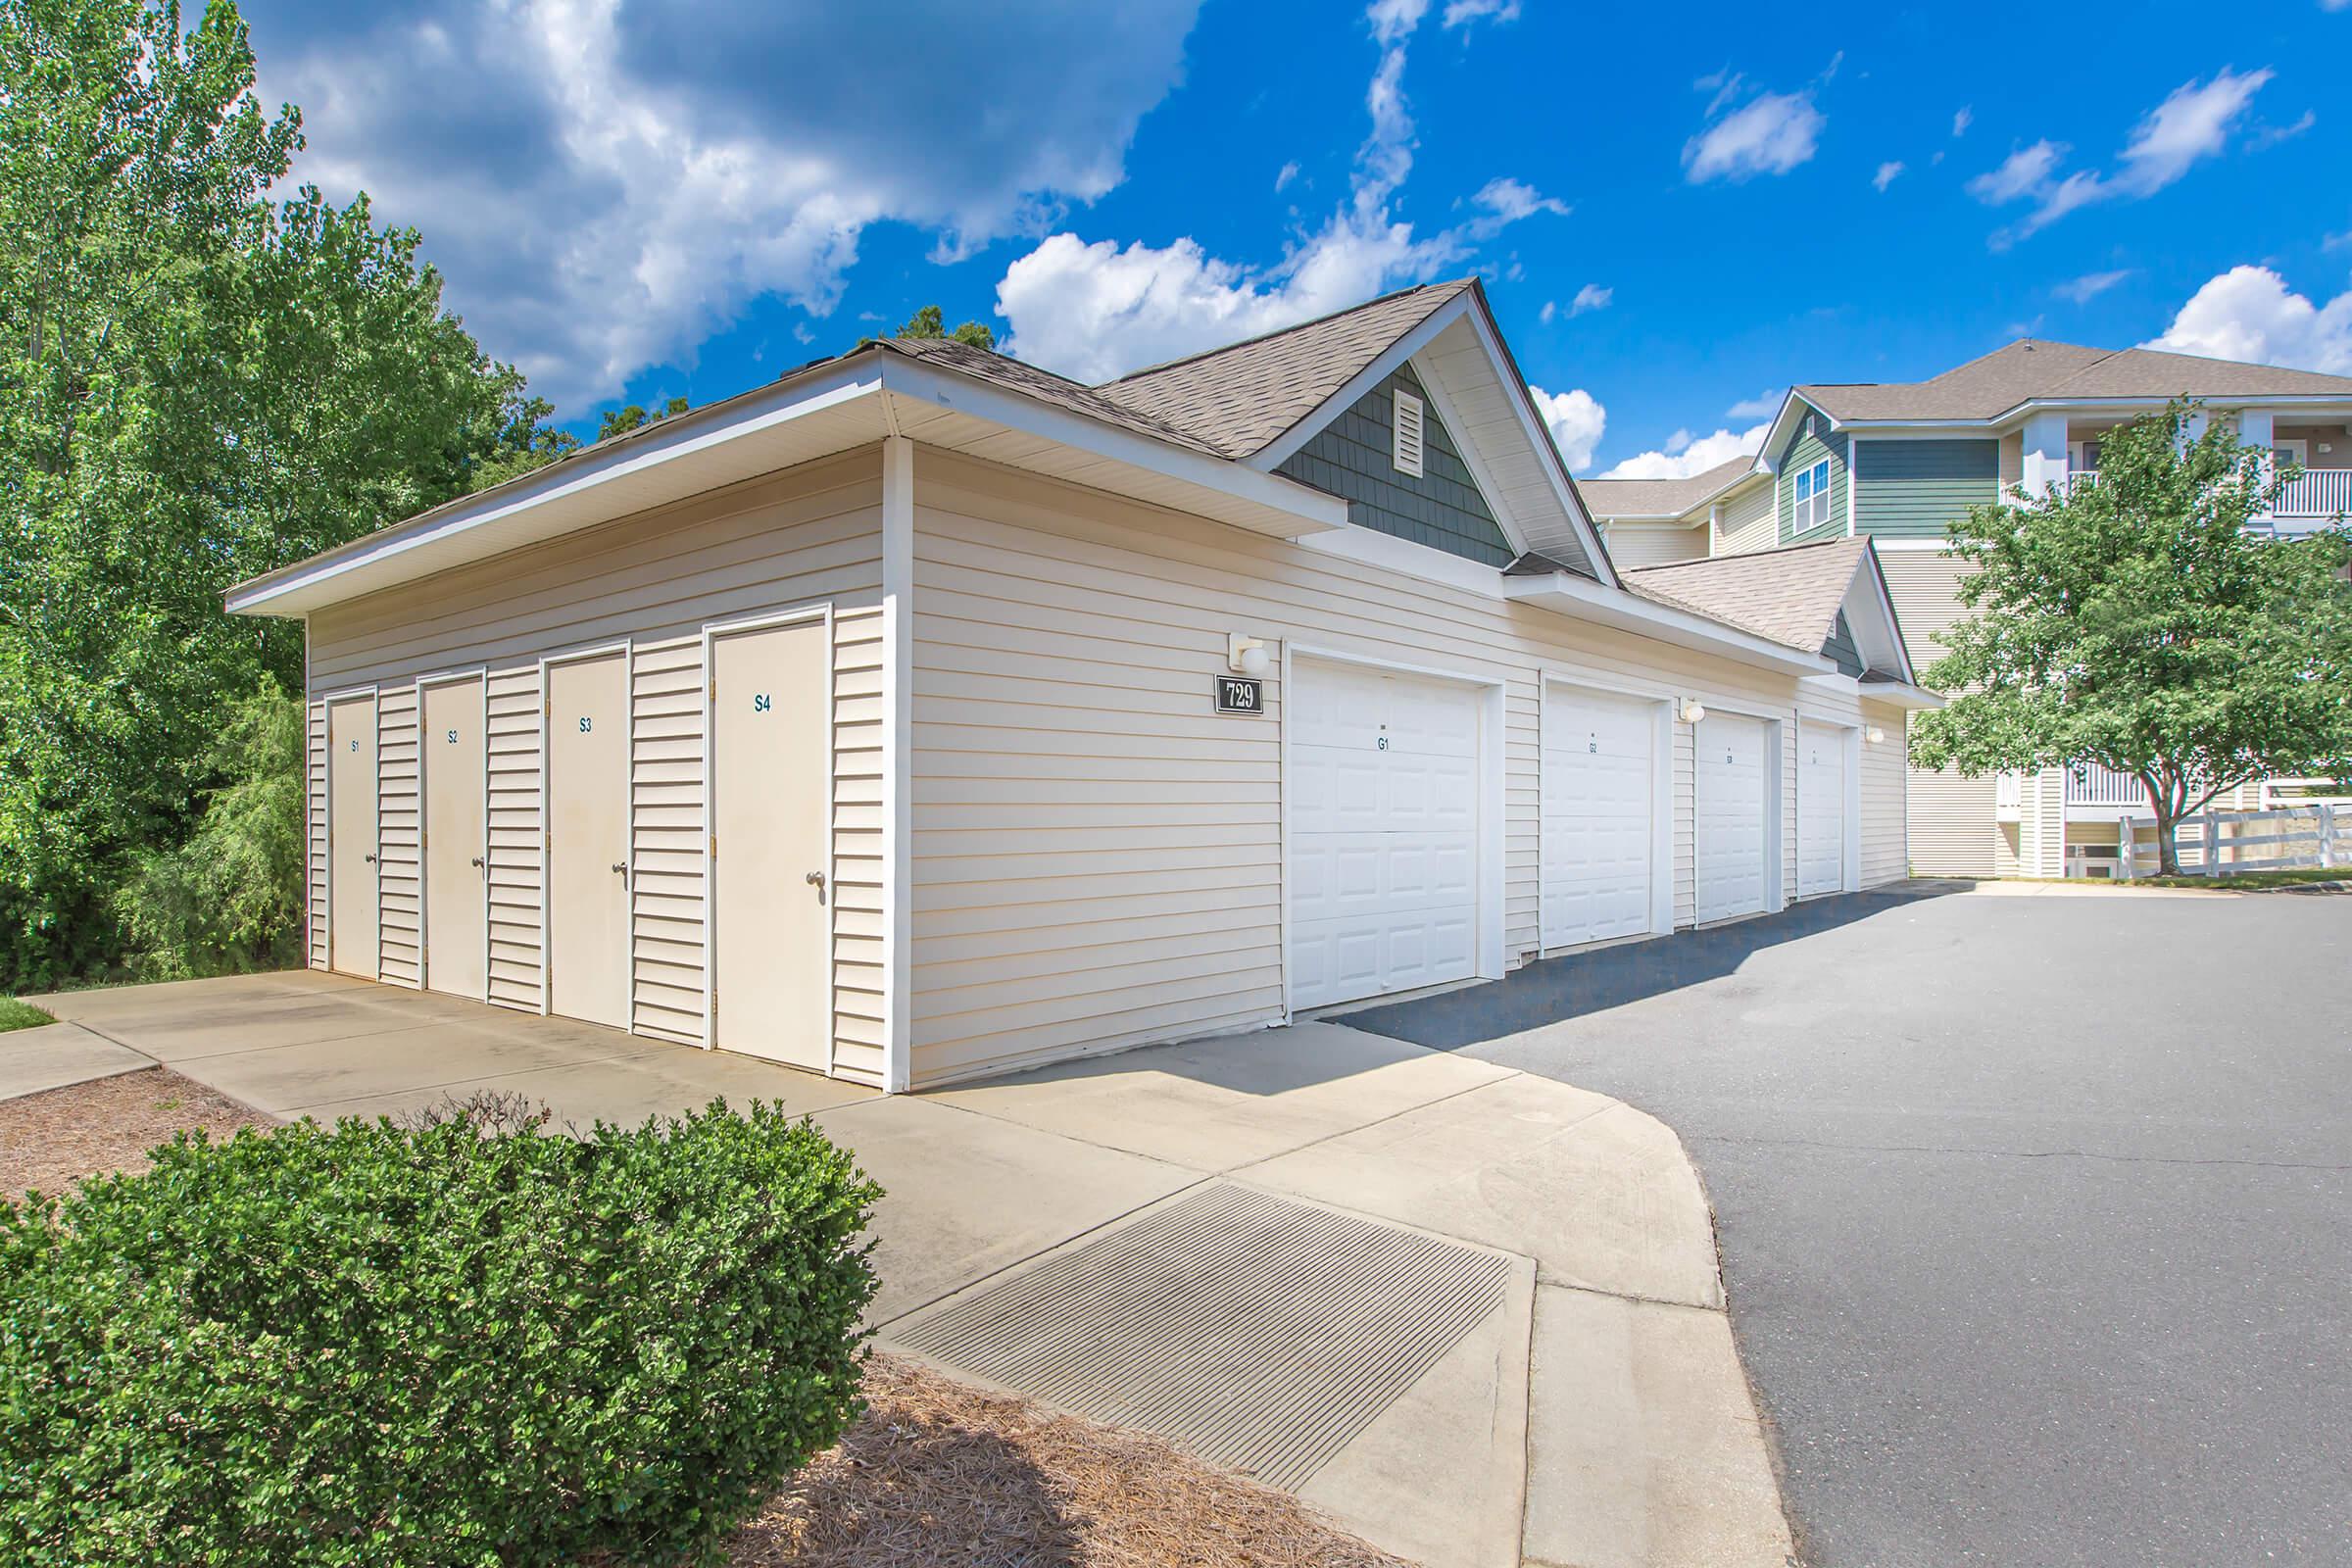 Garage parking with remote access at Whisper Creek in Rock Hill, SC.